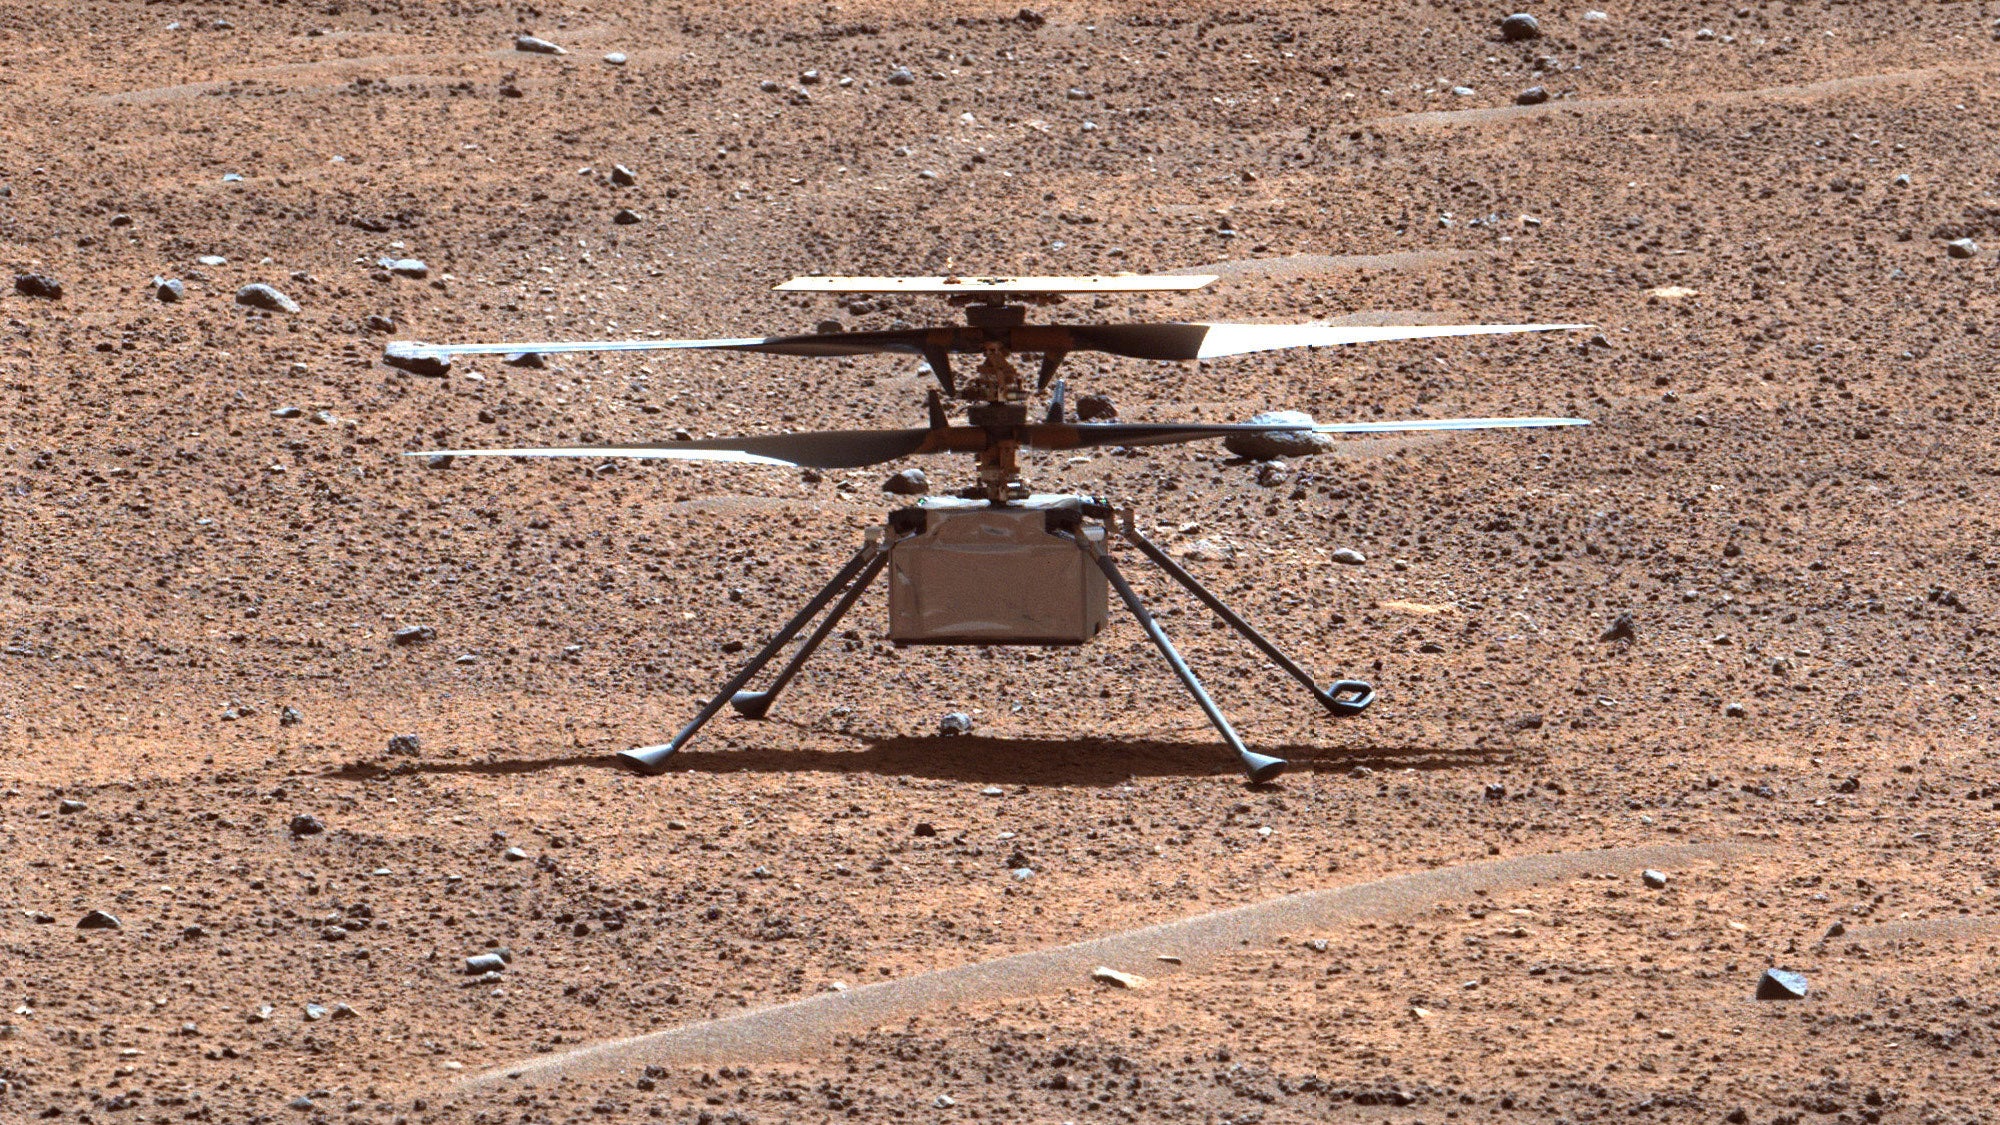 RIP Mars Ingenuity, “the little helicopter that can”